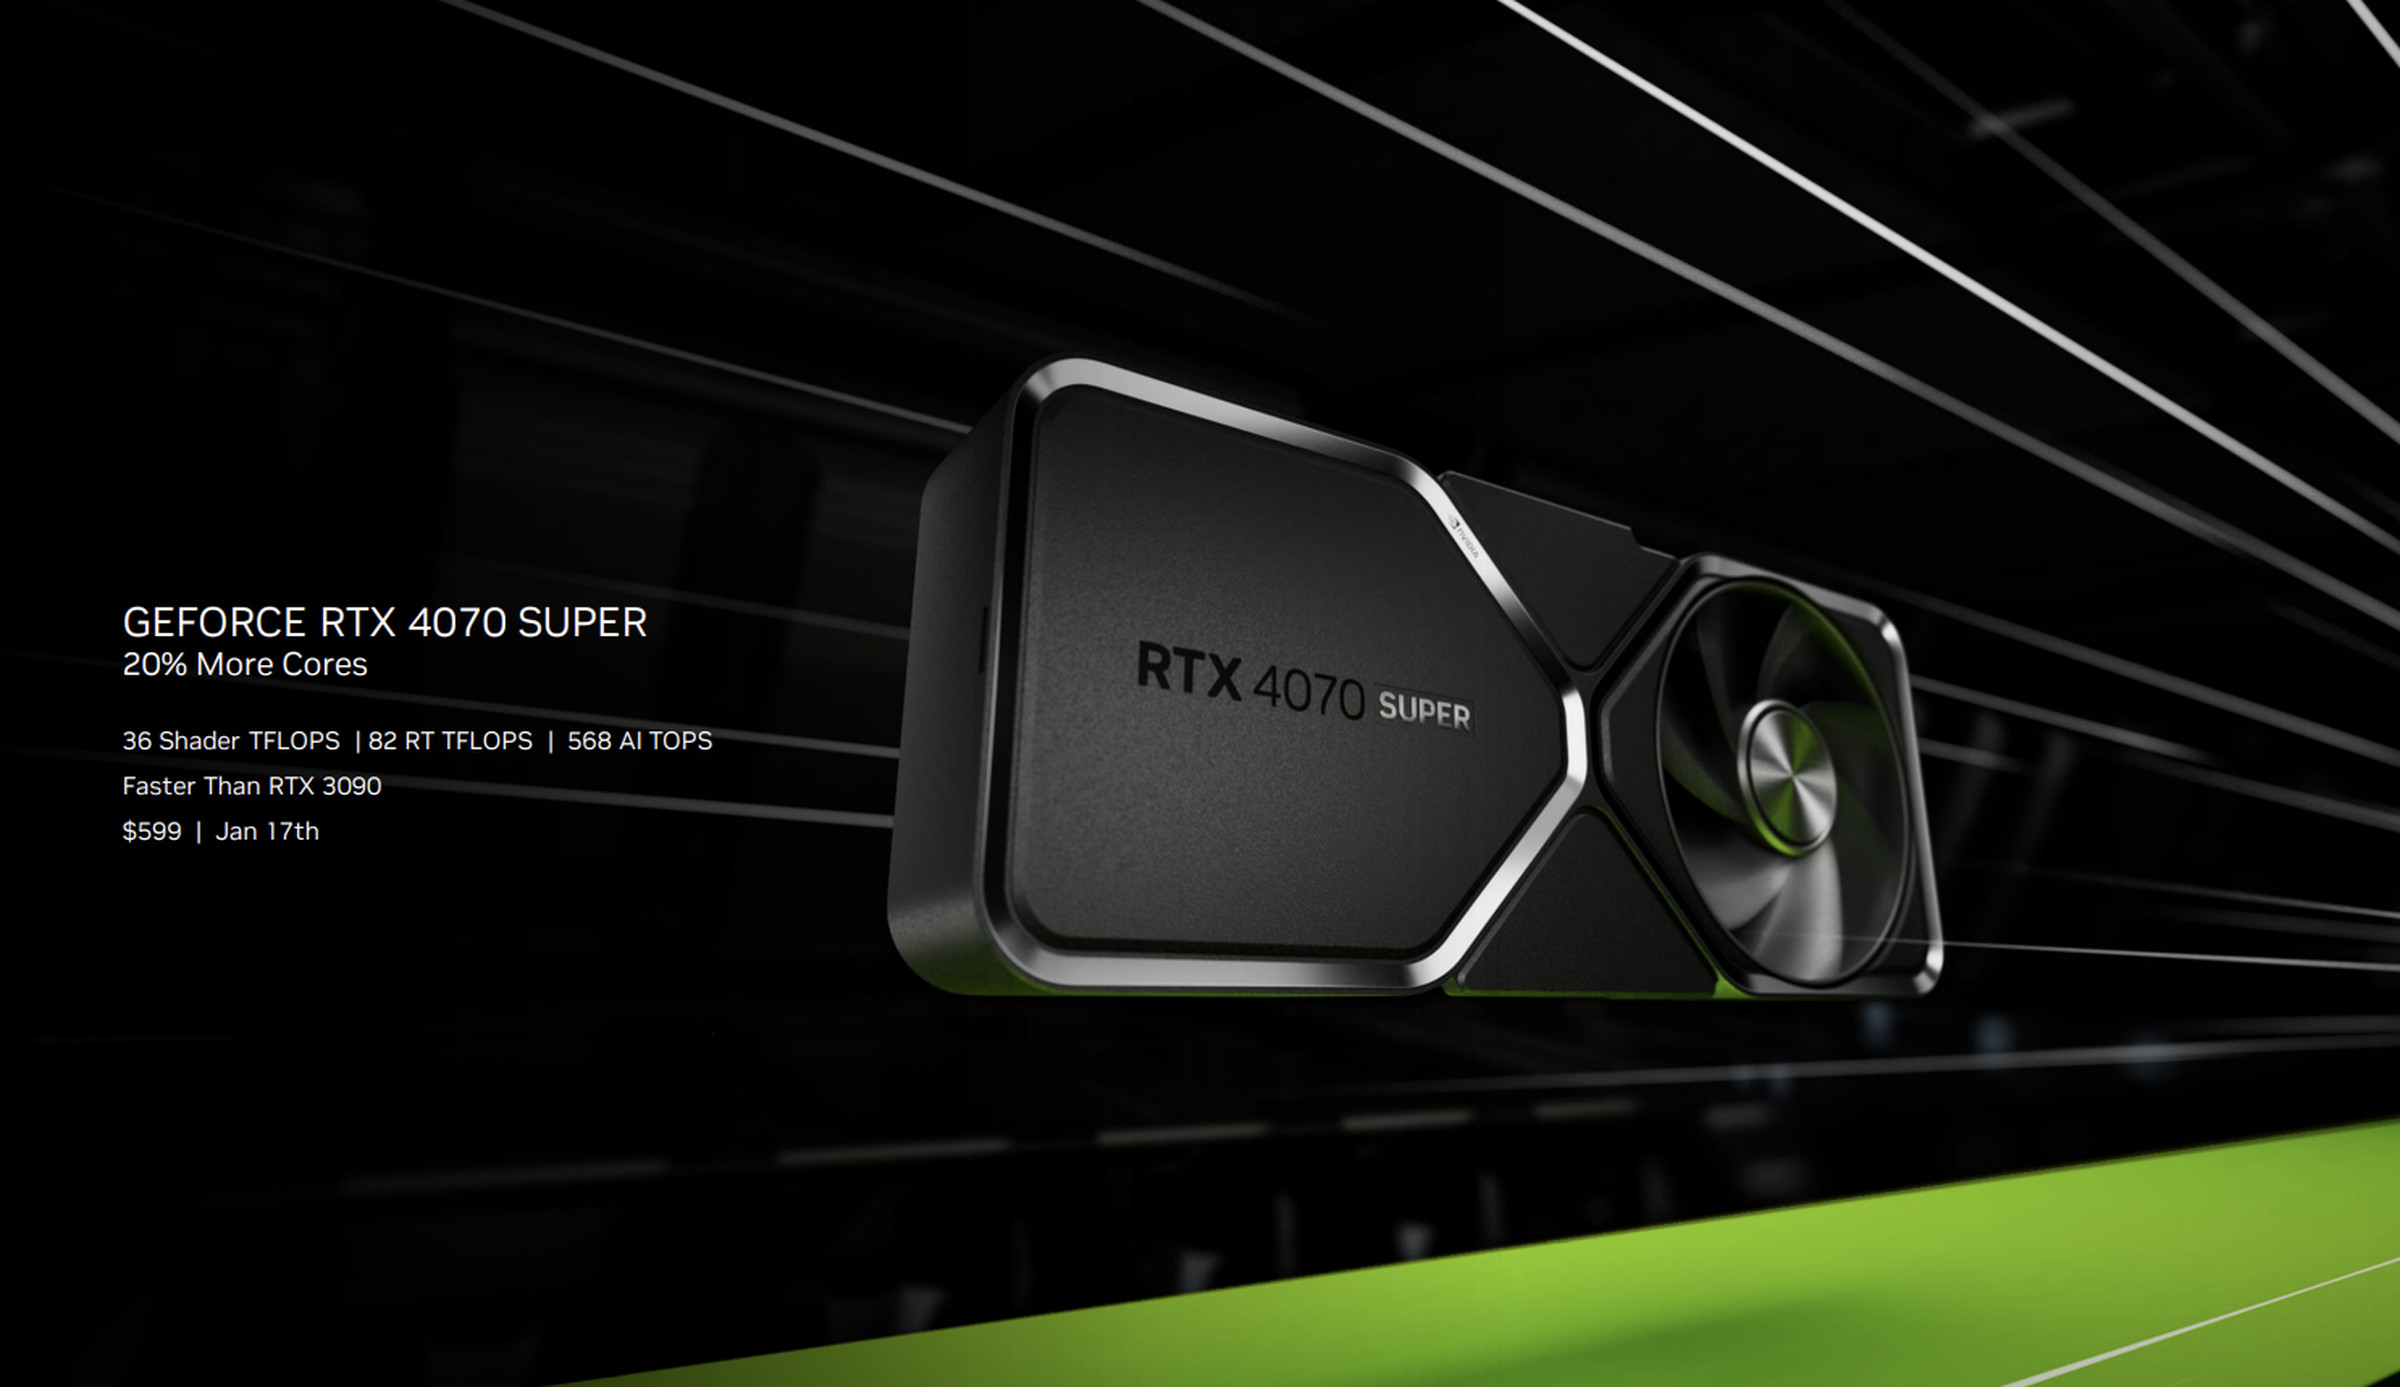 Nvidia says the RTX 4070 Super can beat the RTX 3090.